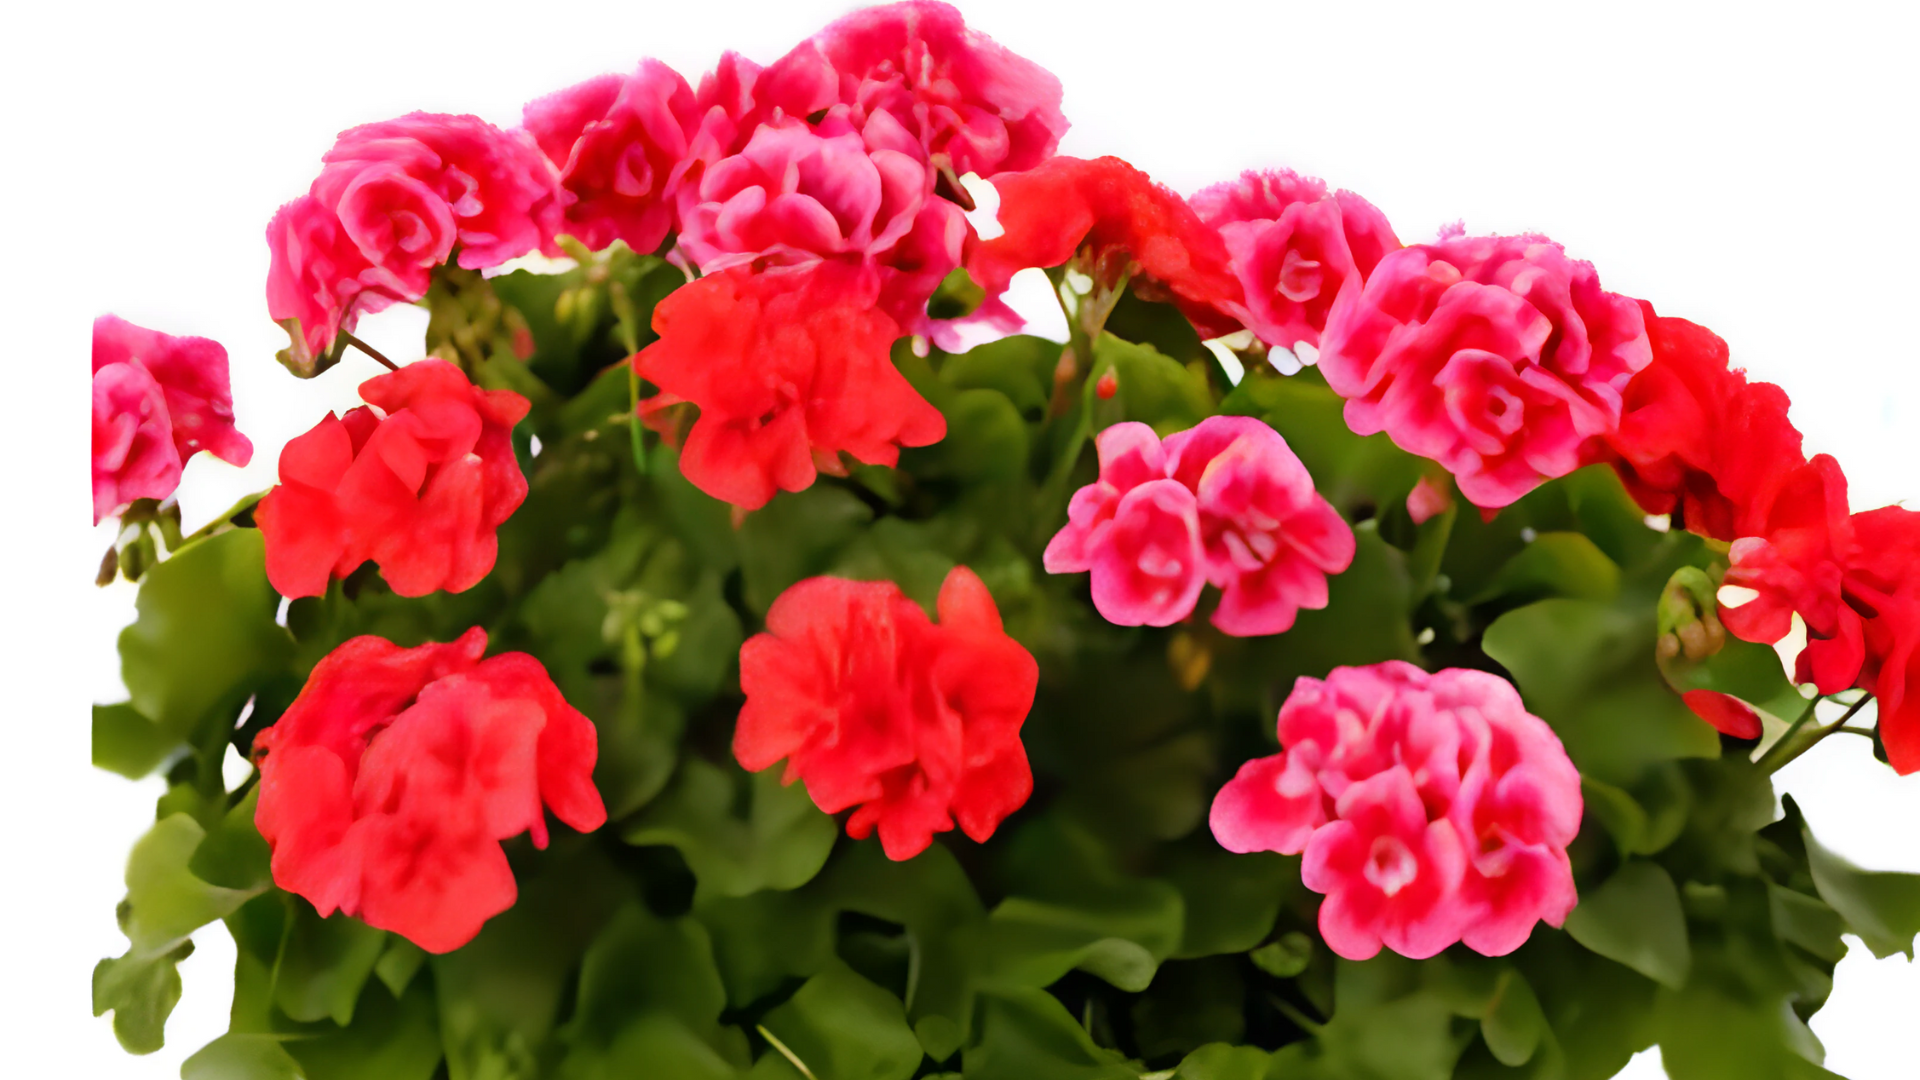 A bunch of red and pink flowers with green leaves on a white background